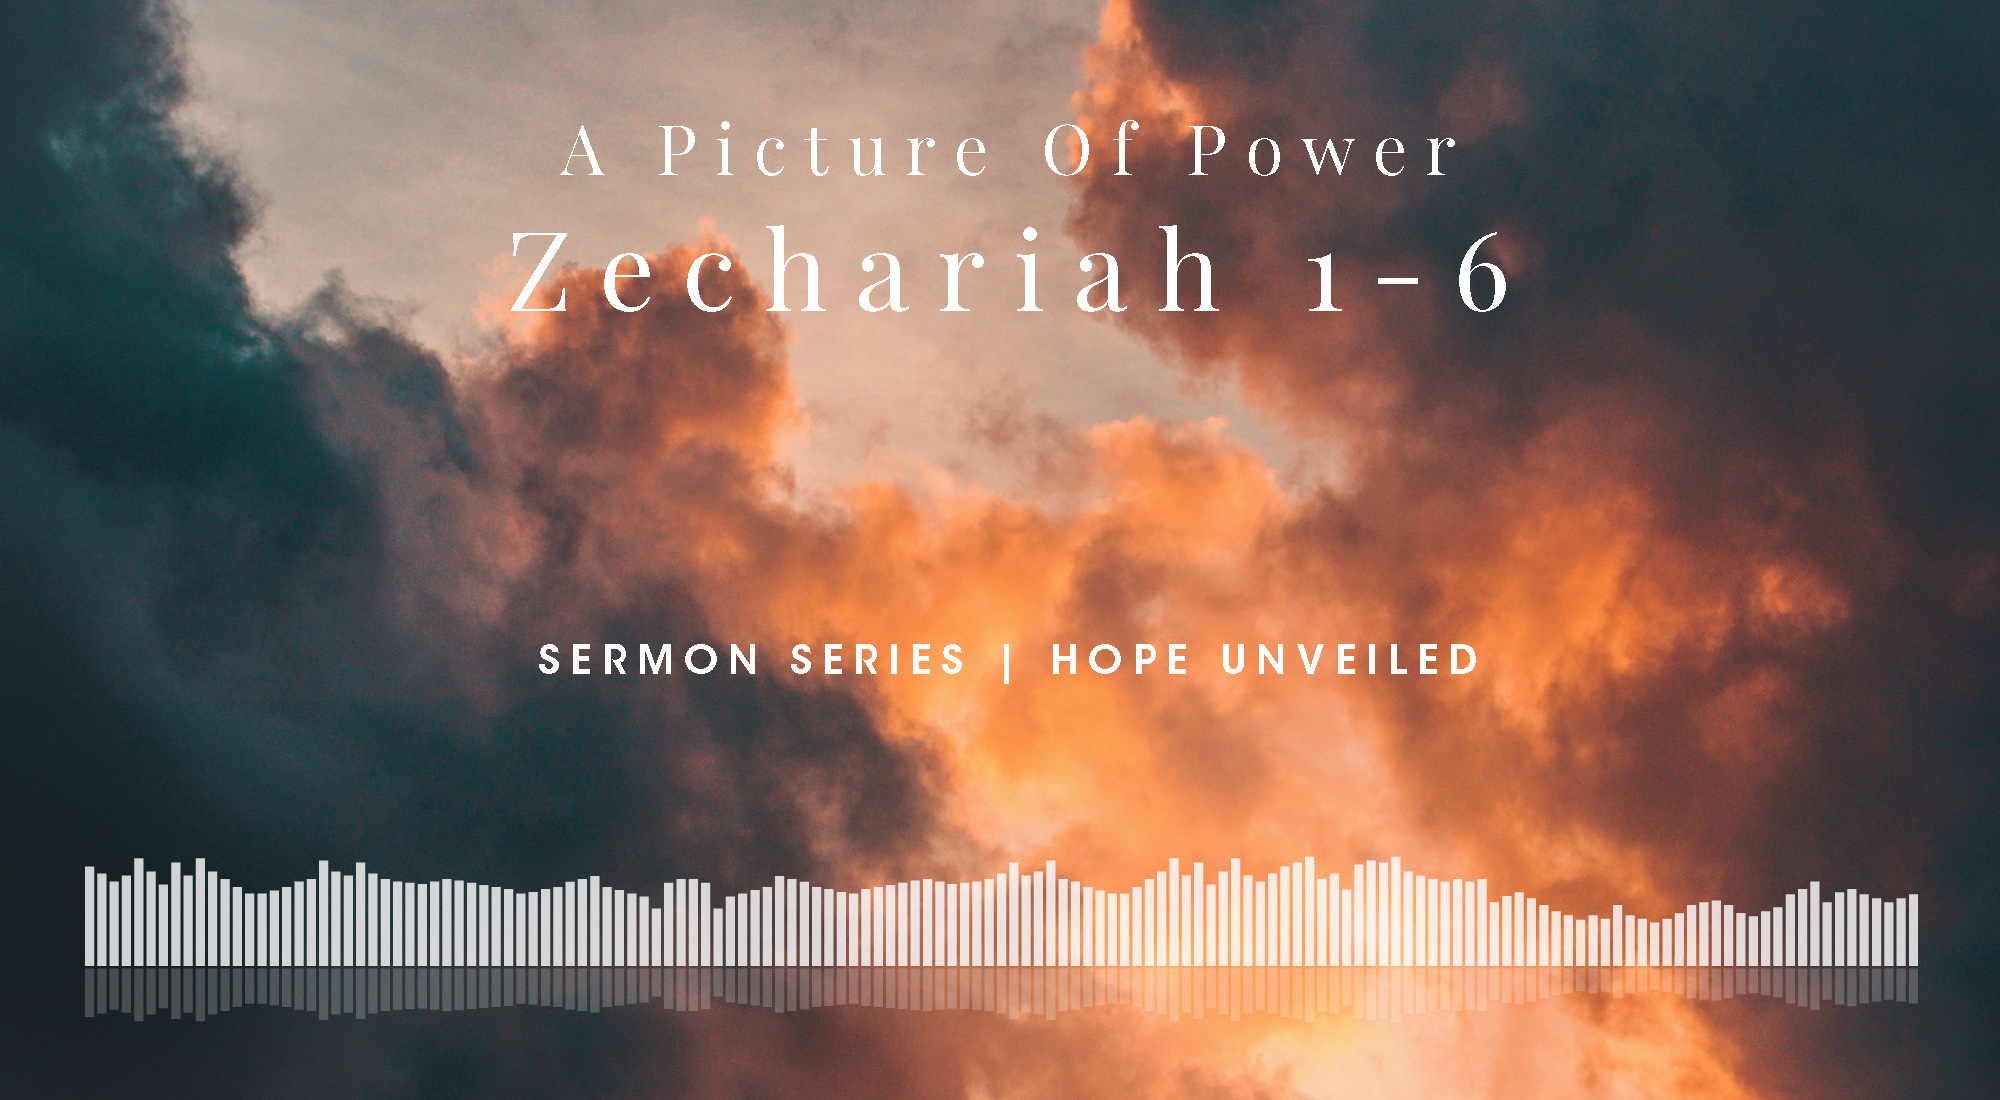 A Picture of Power, Zechariah 1-6 From Our Hope Unveiled Sermon Series